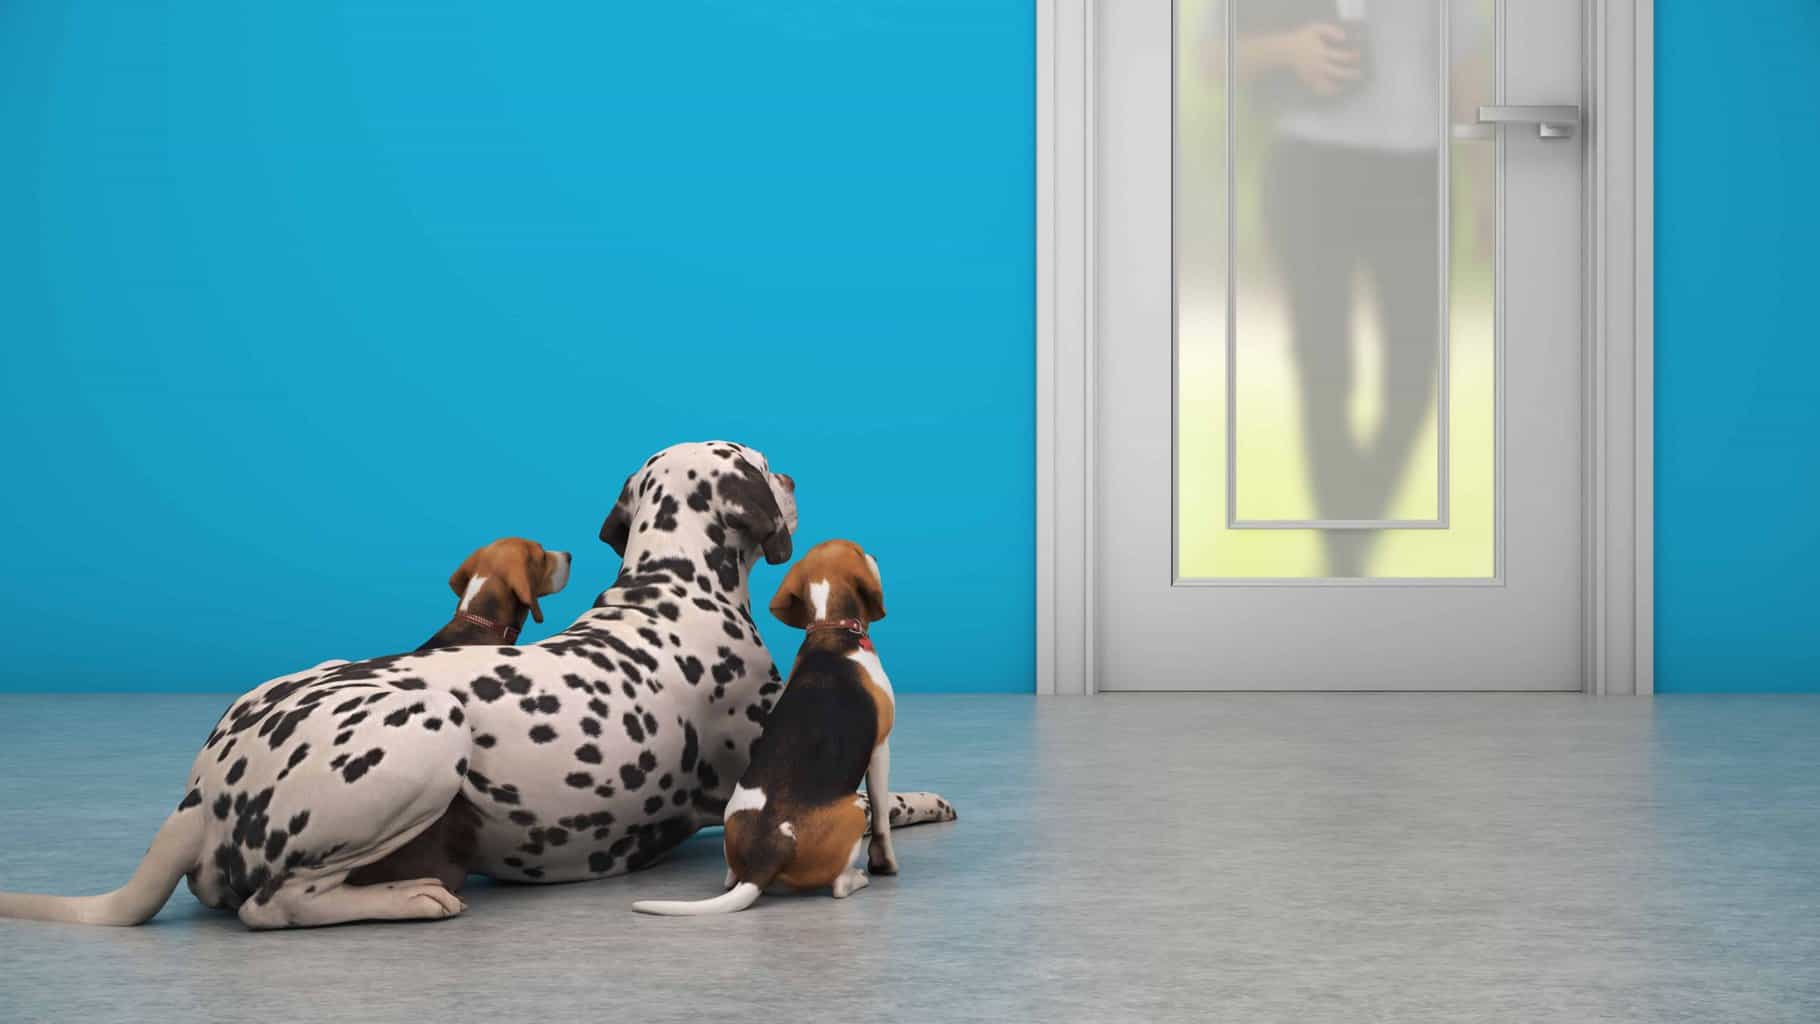 Dalmatian and two beagles wait quietly and patiently at the door without barking. Use impulse control games to teach your dog important life skills to keep him safe and curb unwanted behaviors like barking and jumping.